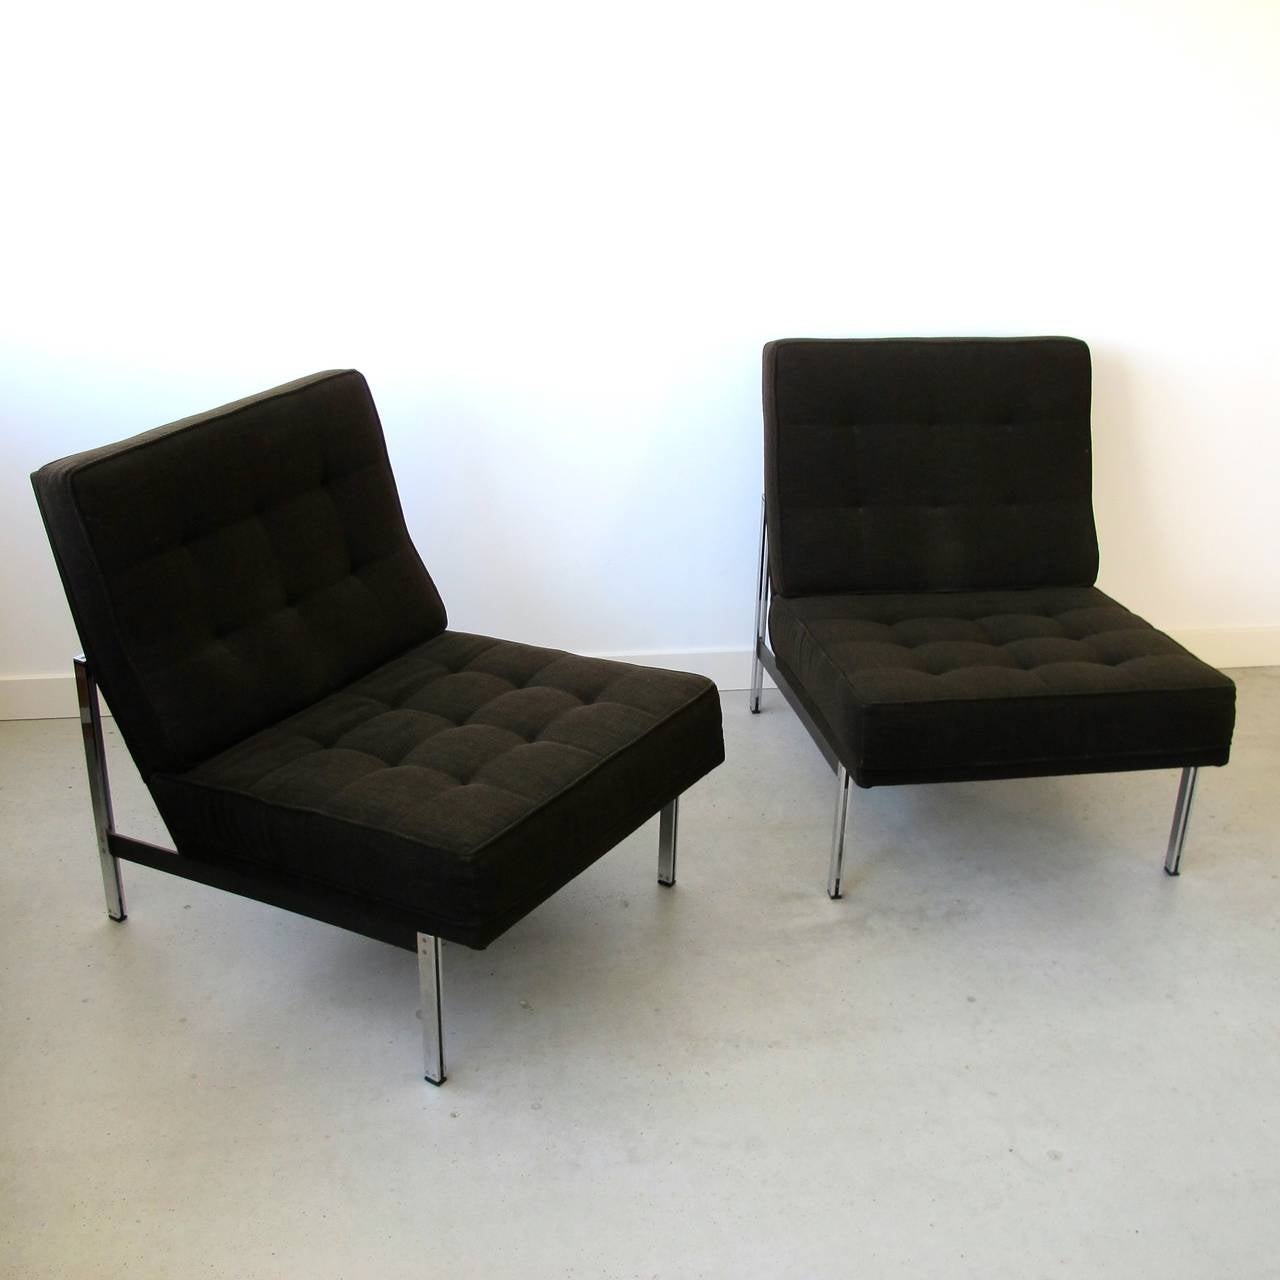 Modern Pair of Parallel Bar Lounge Chairs by Florence Knoll, circa 1955